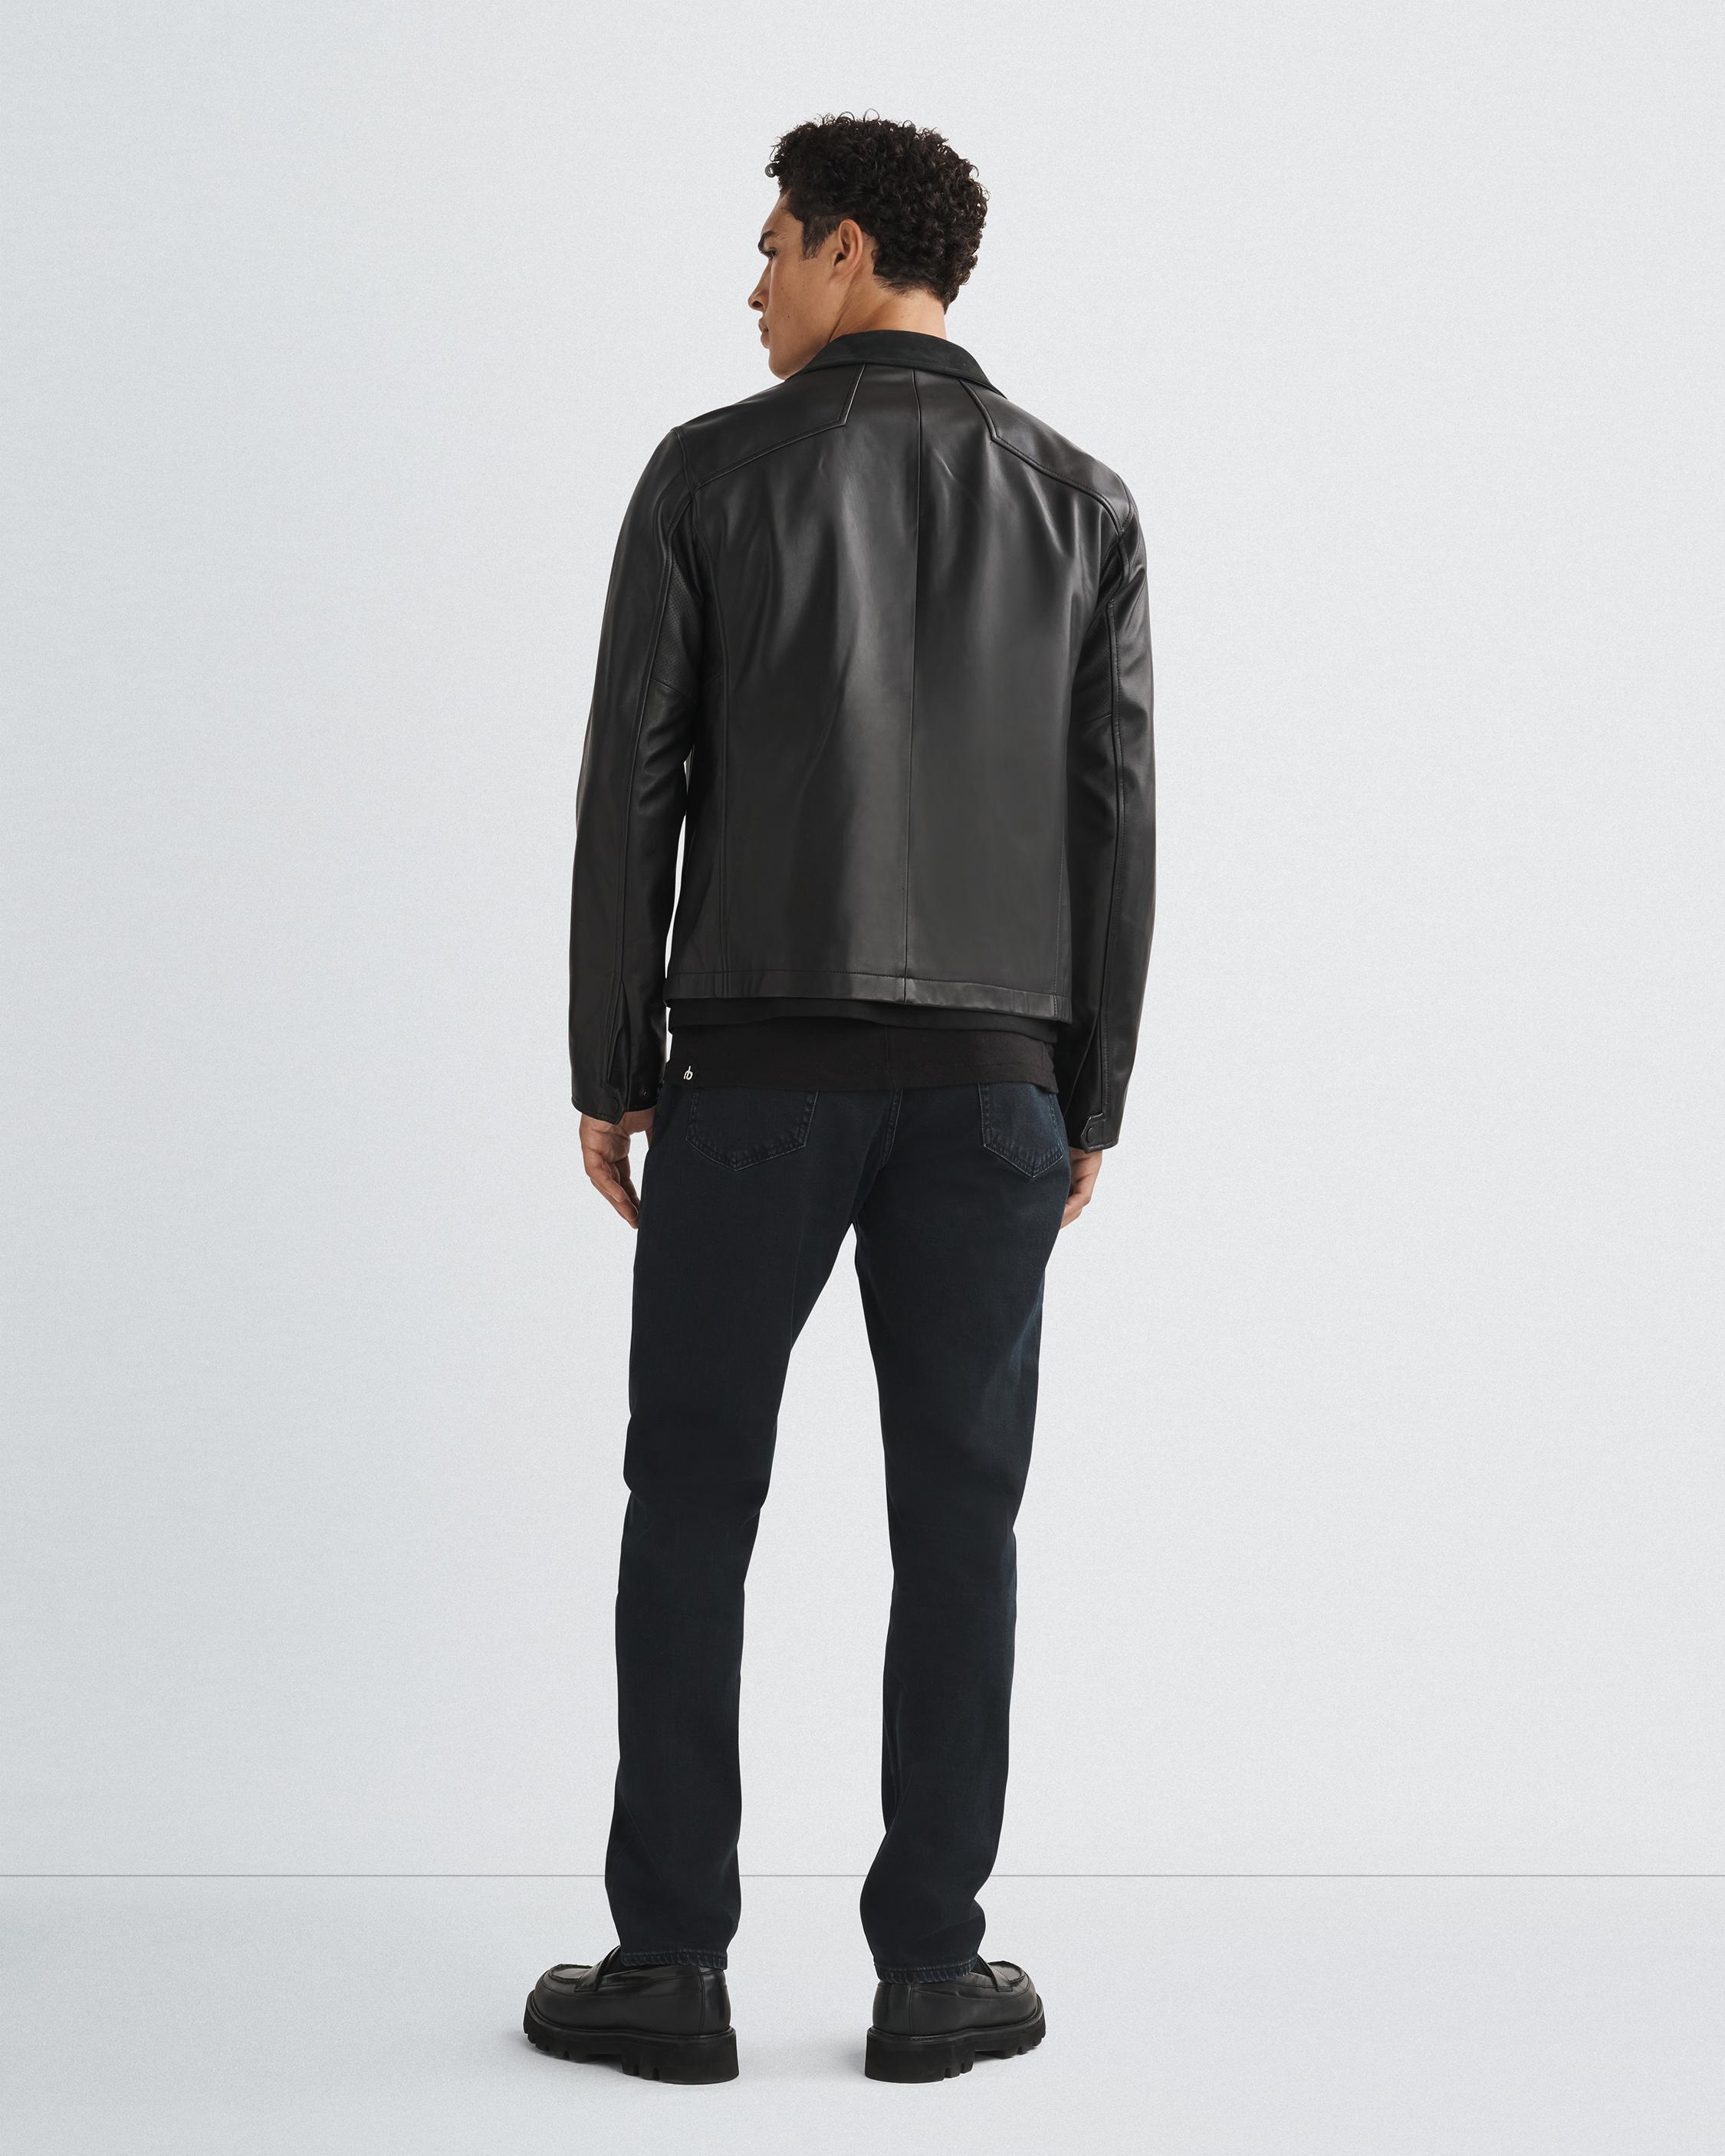 Grant Leather Jacket
Relaxed Fit Jacket - 5